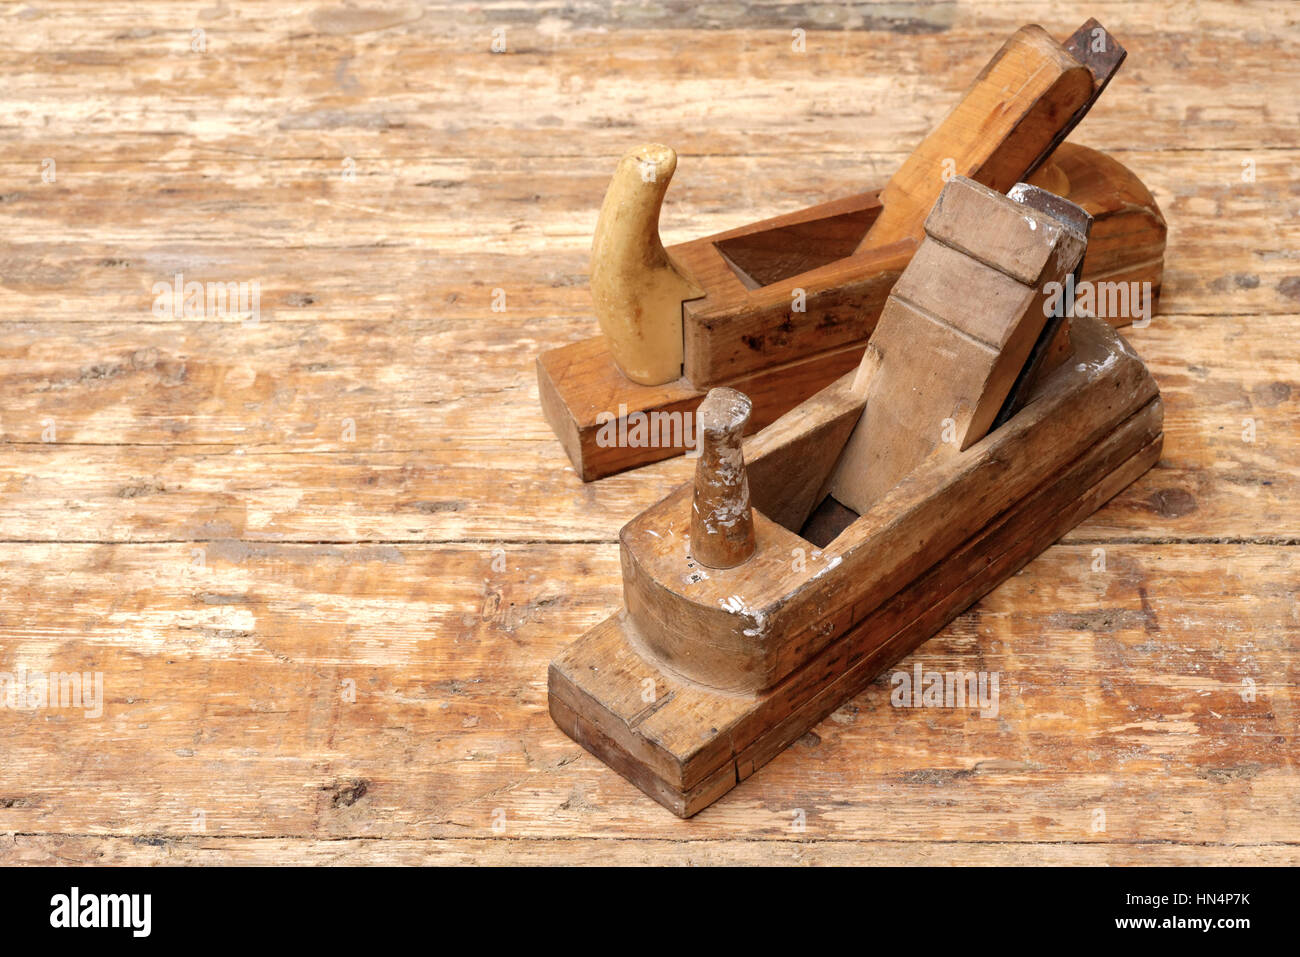 Backgrounds and textures: two old carpenter's planes on a wooden workbench Stock Photo